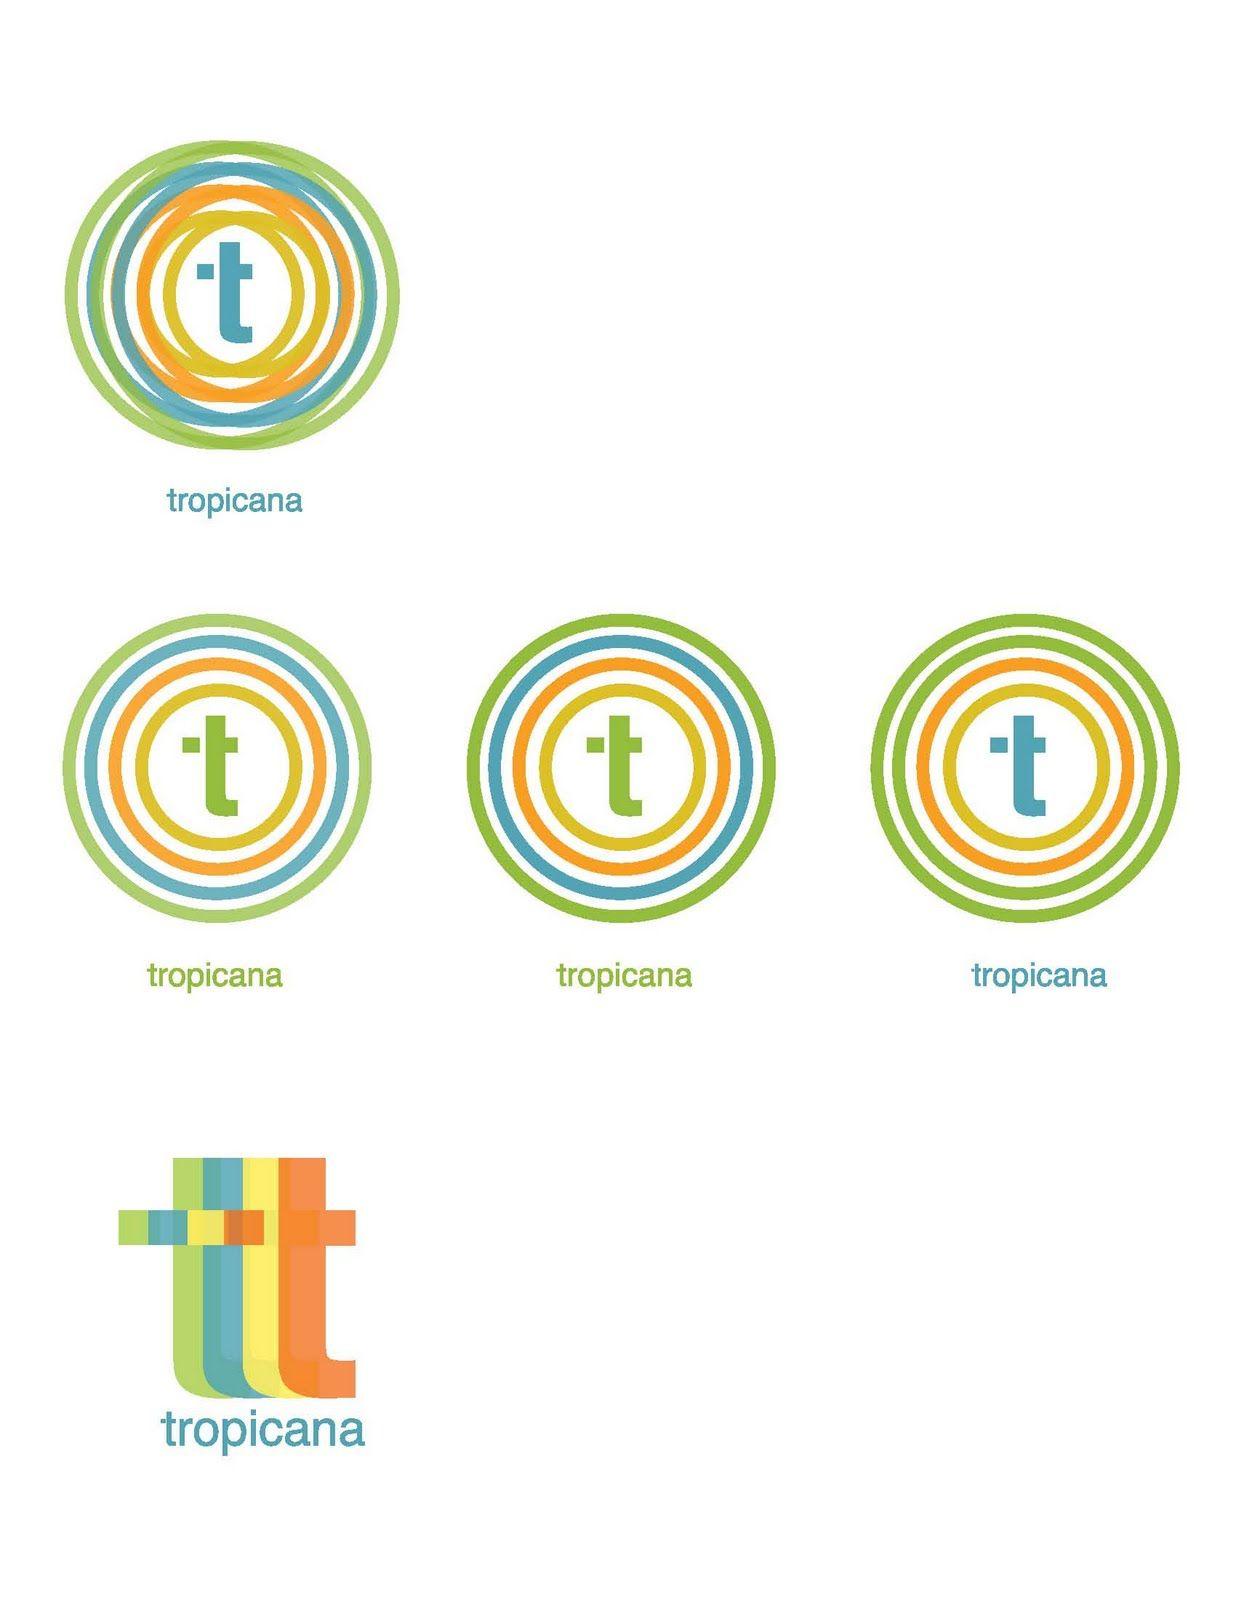 Turquoise and Orange Logo - The Hogar del Niño Project: Graphic Design Logo for the Foundation